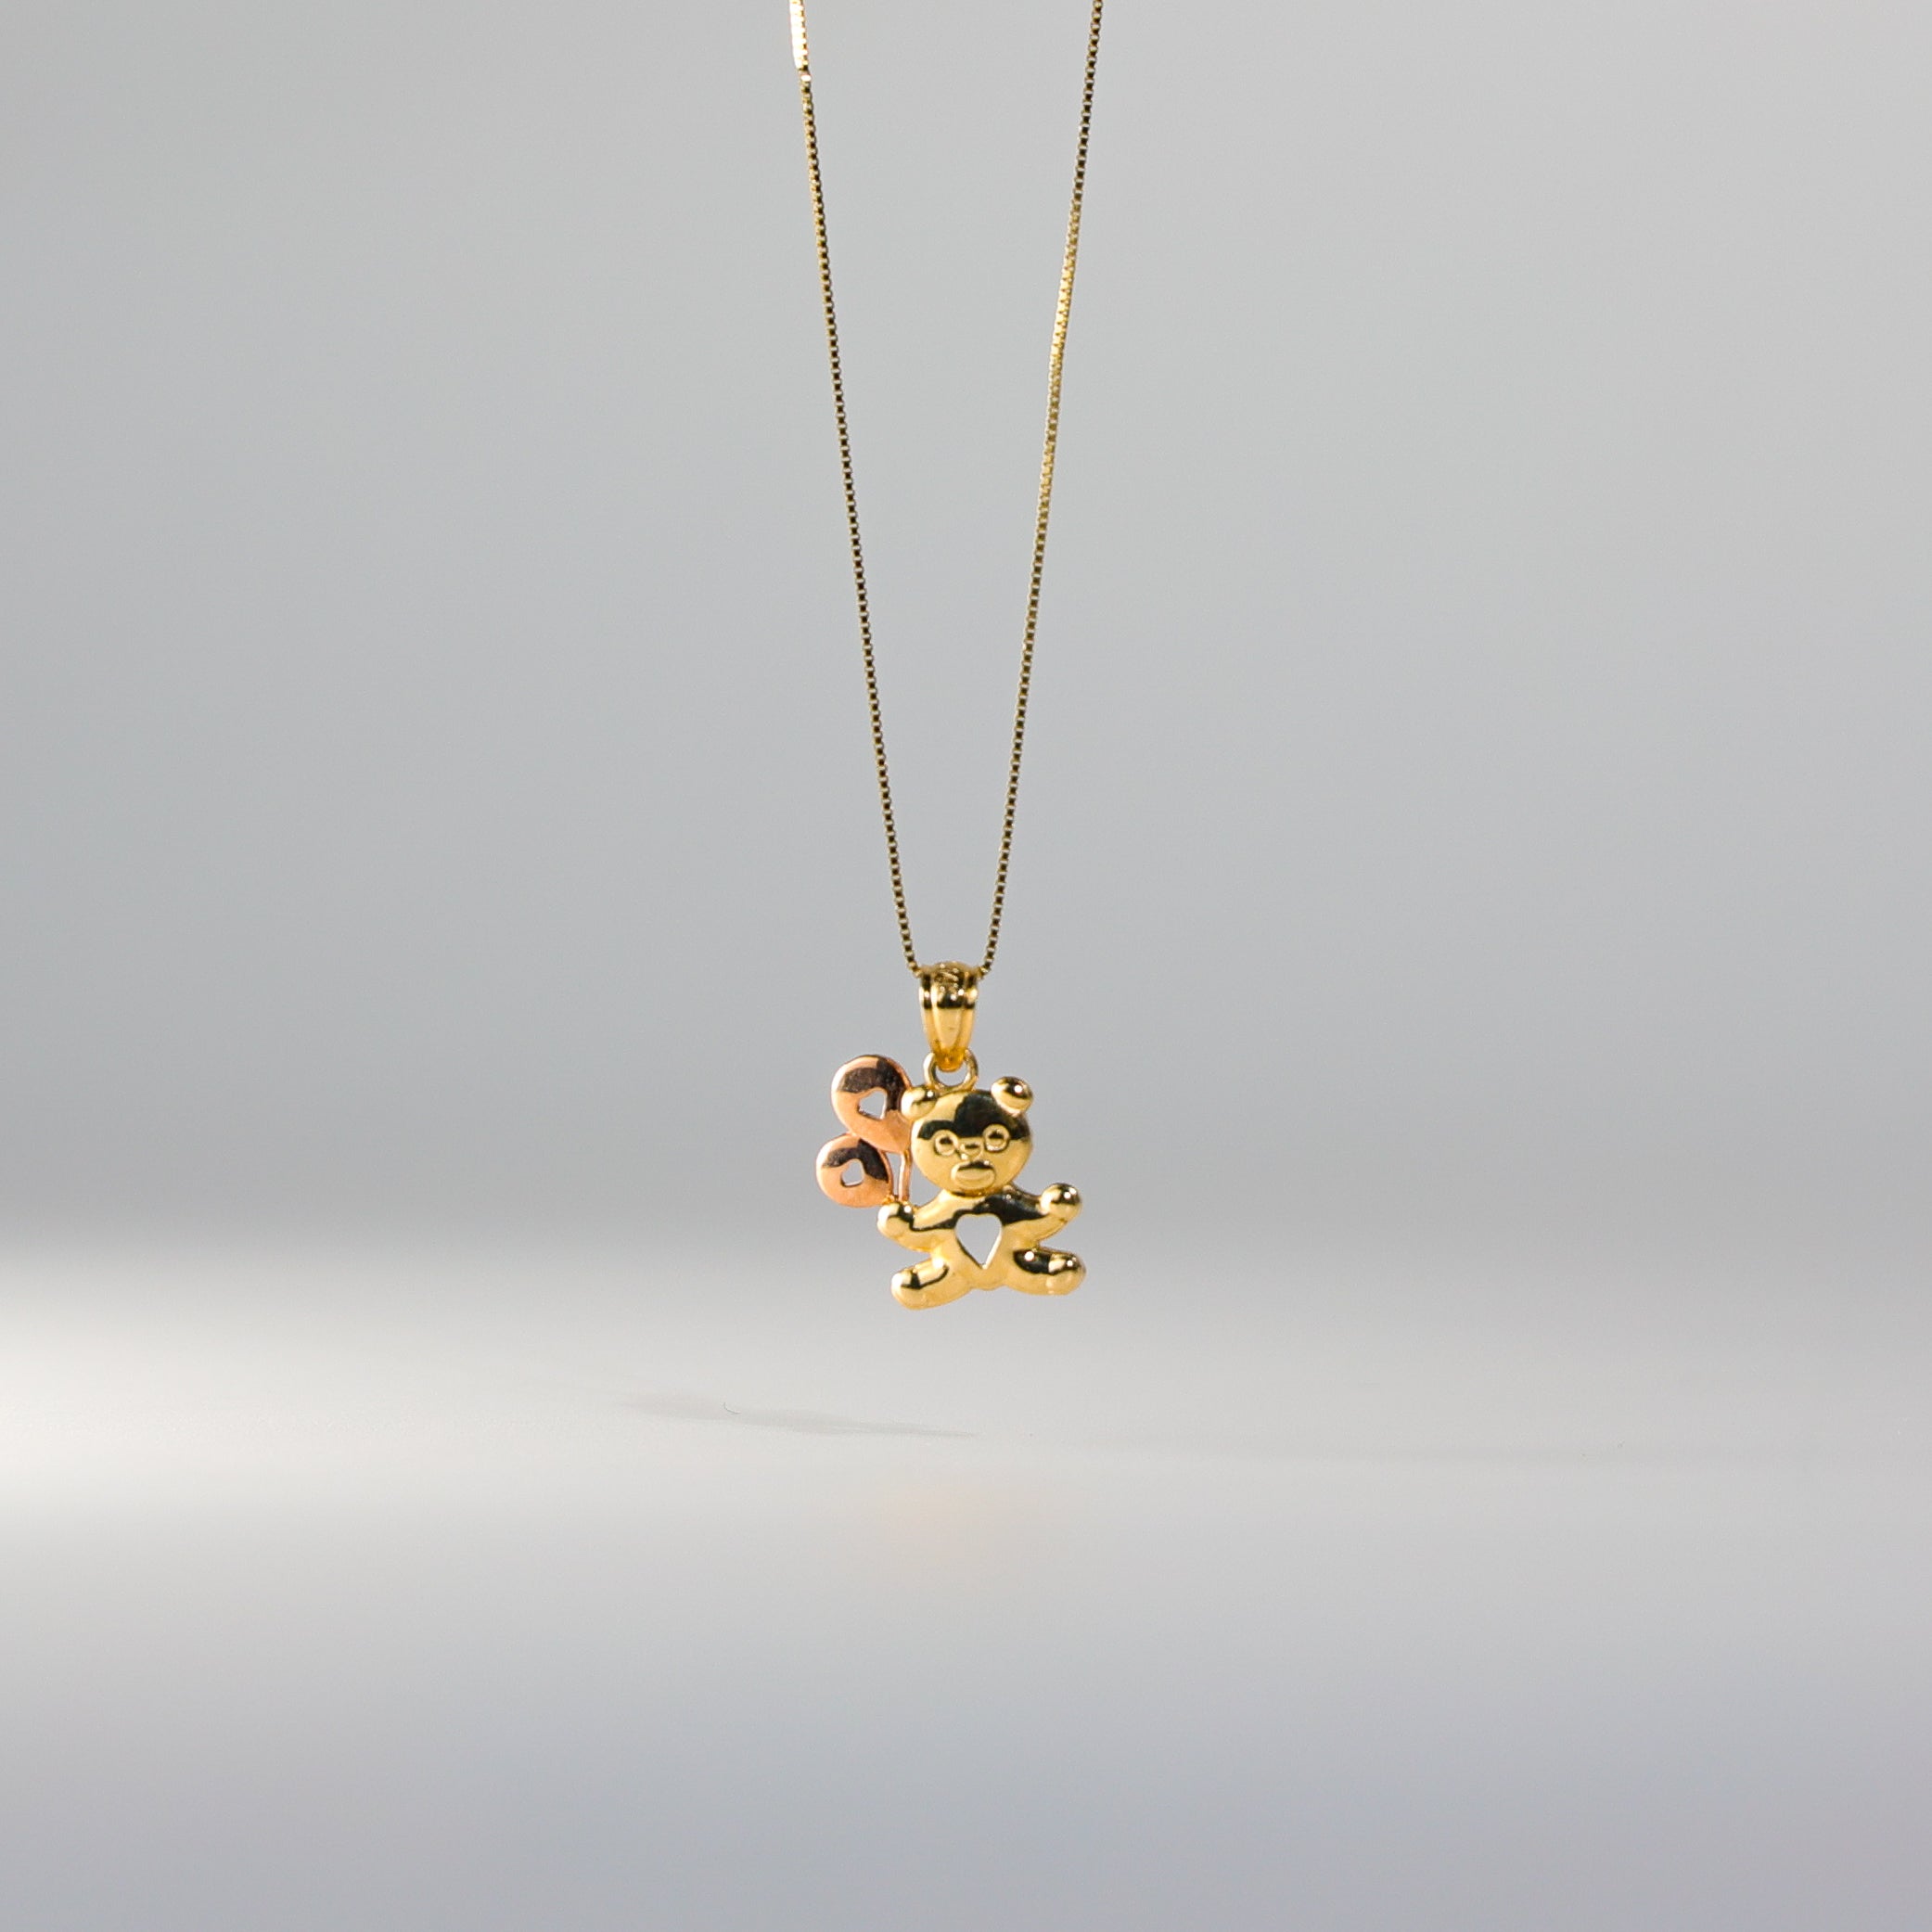 Gold Baby Bear with Balloon Pendant Model-1653 - Charlie & Co. Jewelry